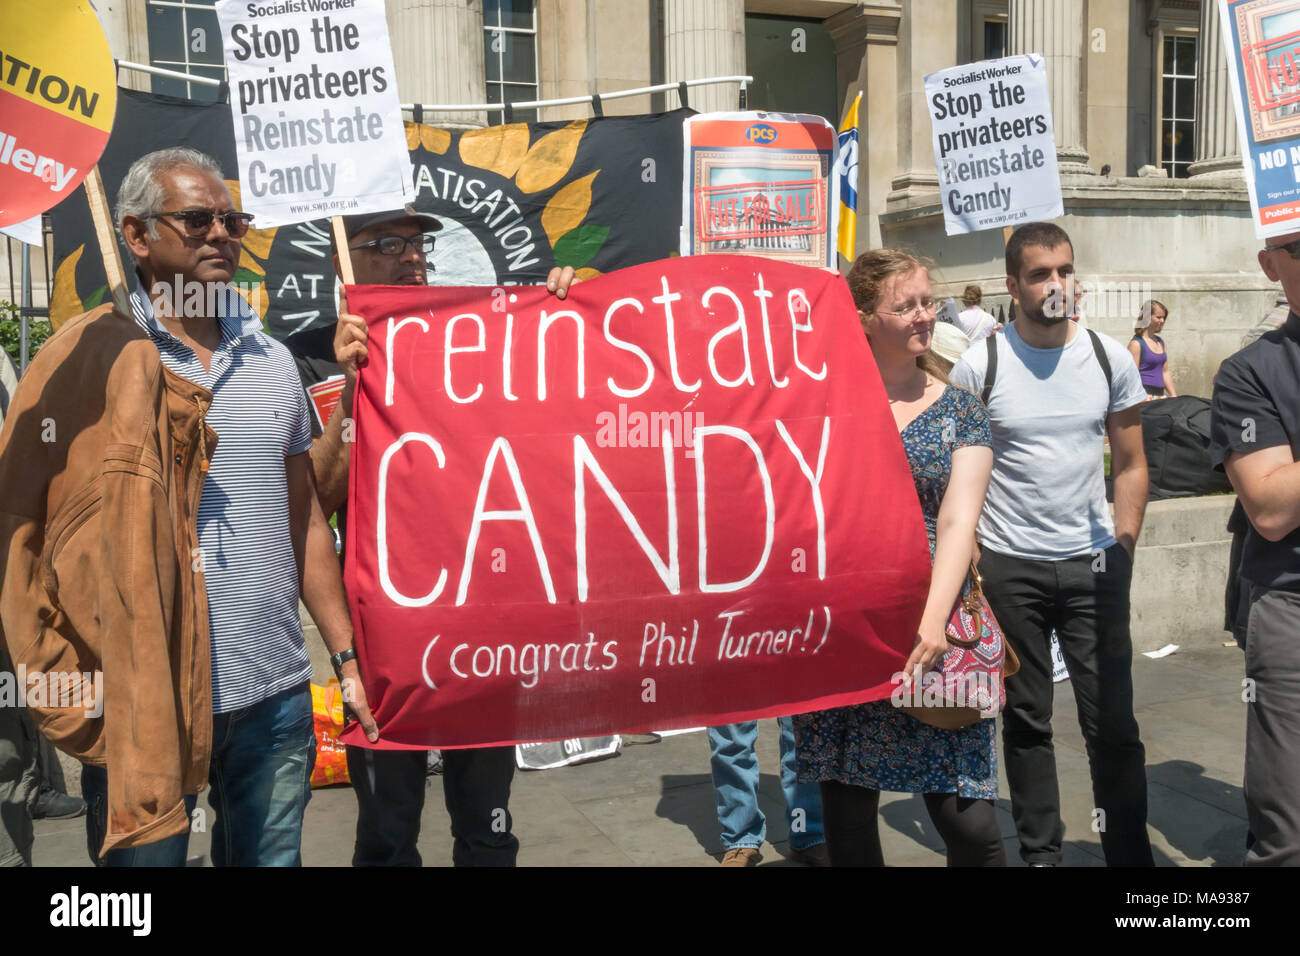 The National Gallery strikers against privatisation call for the reinstatement of sacked PCS rep Candy Udwin, and congratulate Phil Turner, an NUJ rep saved from unfair redundancy by a protest in Rotherham. Stock Photo